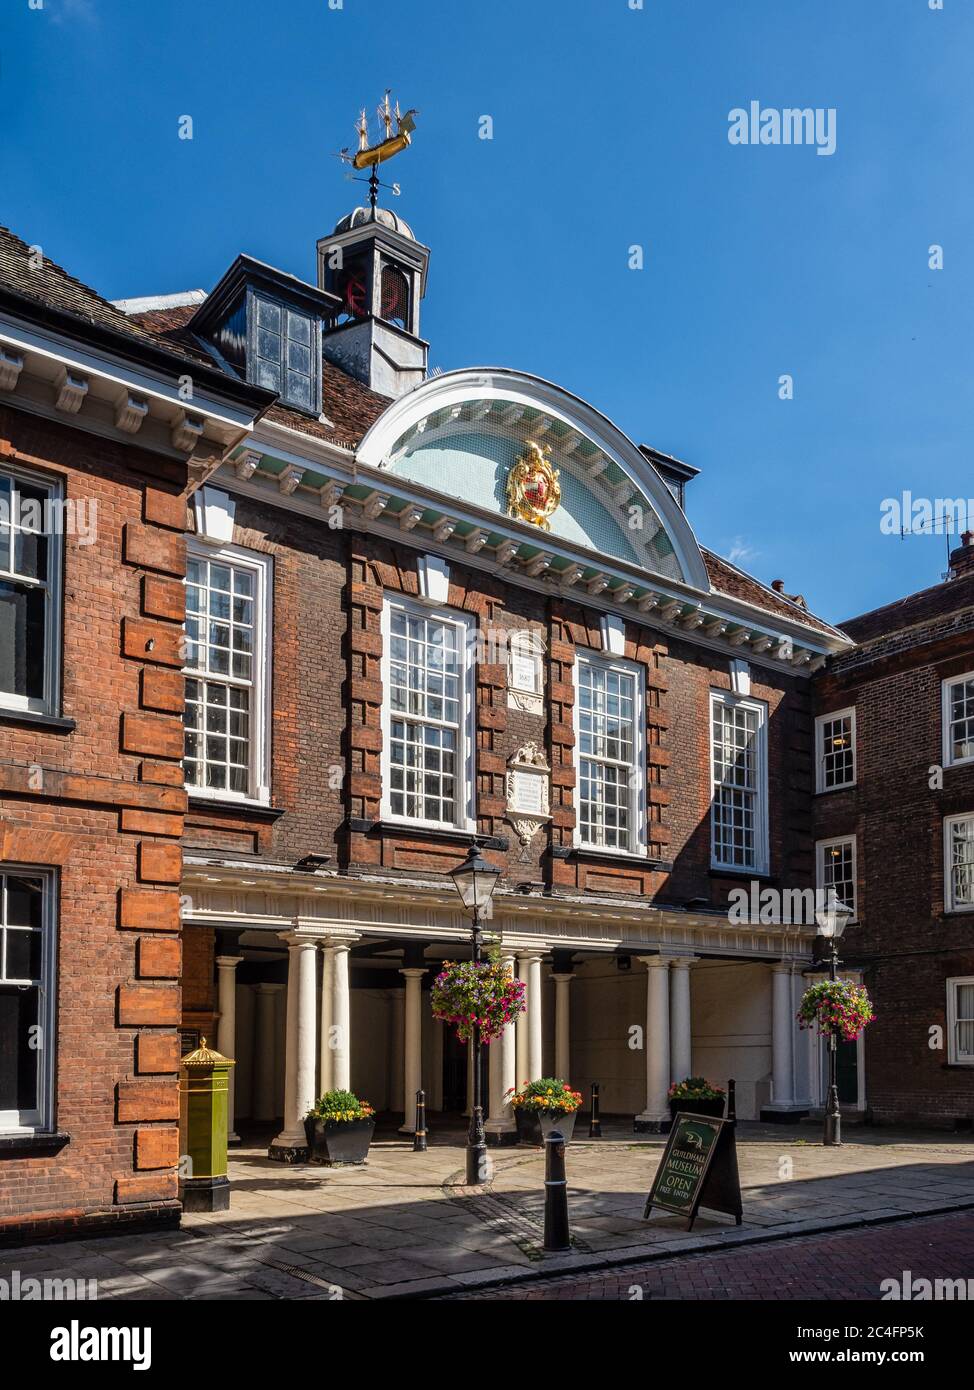 ROCHESTER, KENT, UK - SEPTEMBER 13, 2019: The front facade of Rochester Guildhall Museum, an historic 17th Century building located in the High Street Stock Photo